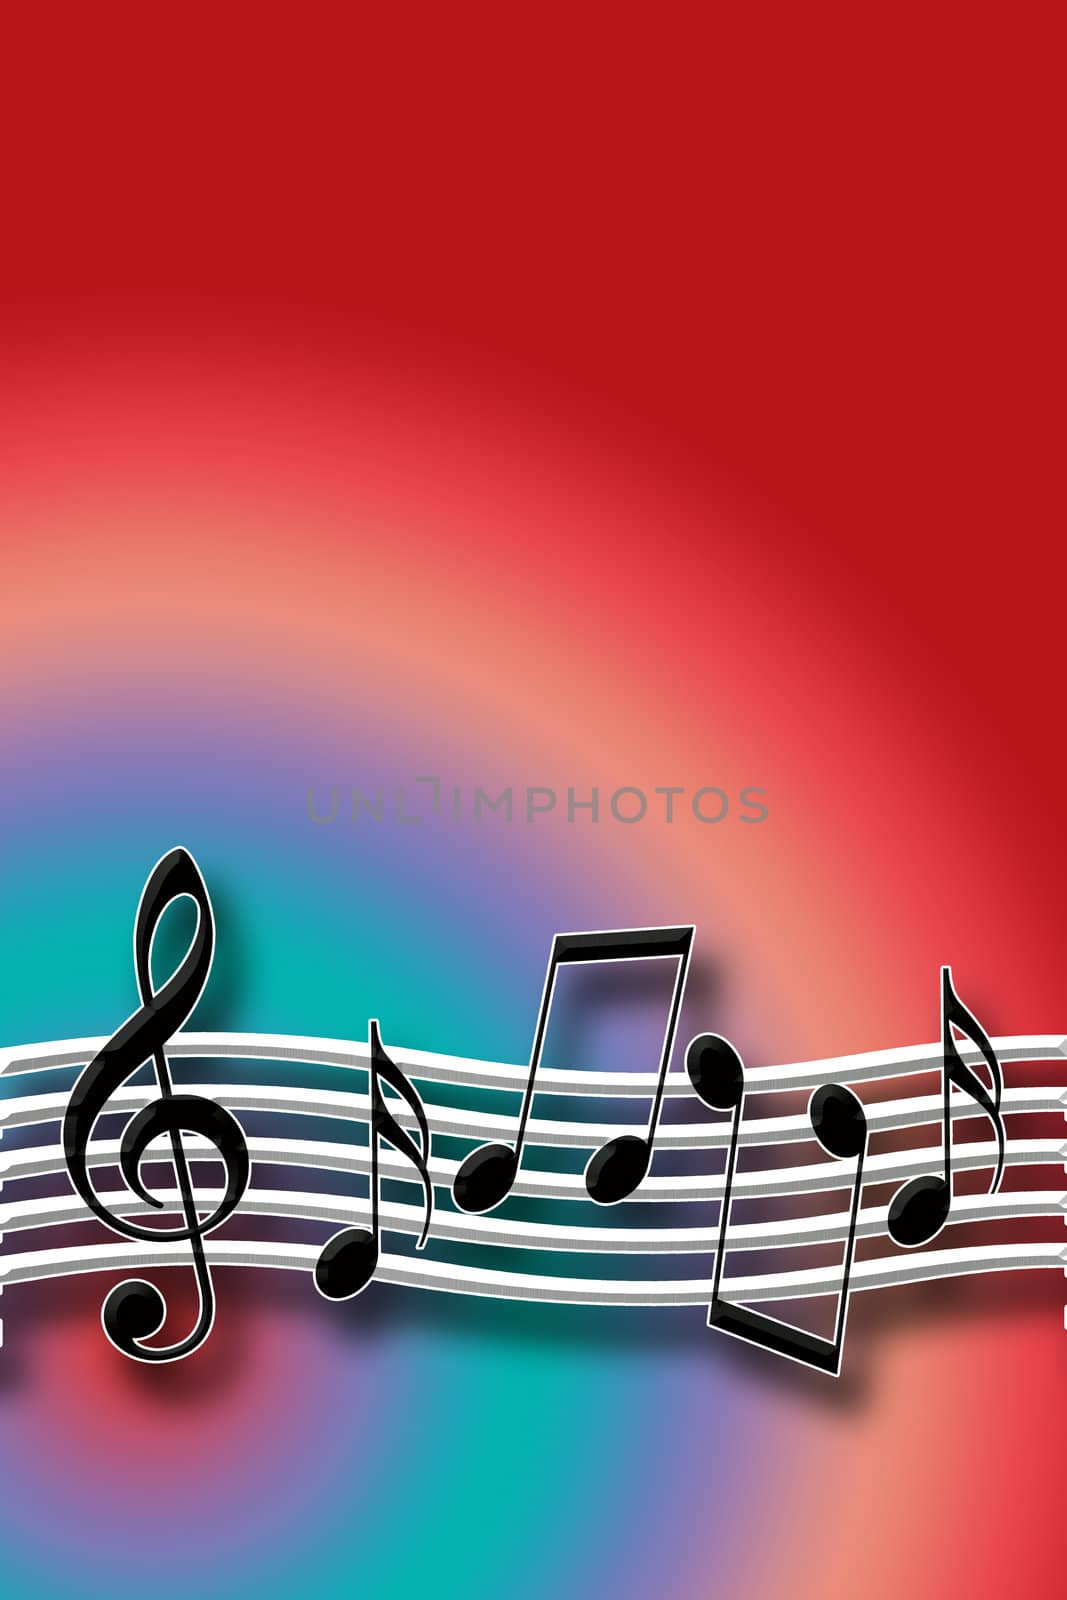 Warm Music Theme with Musical Symbols